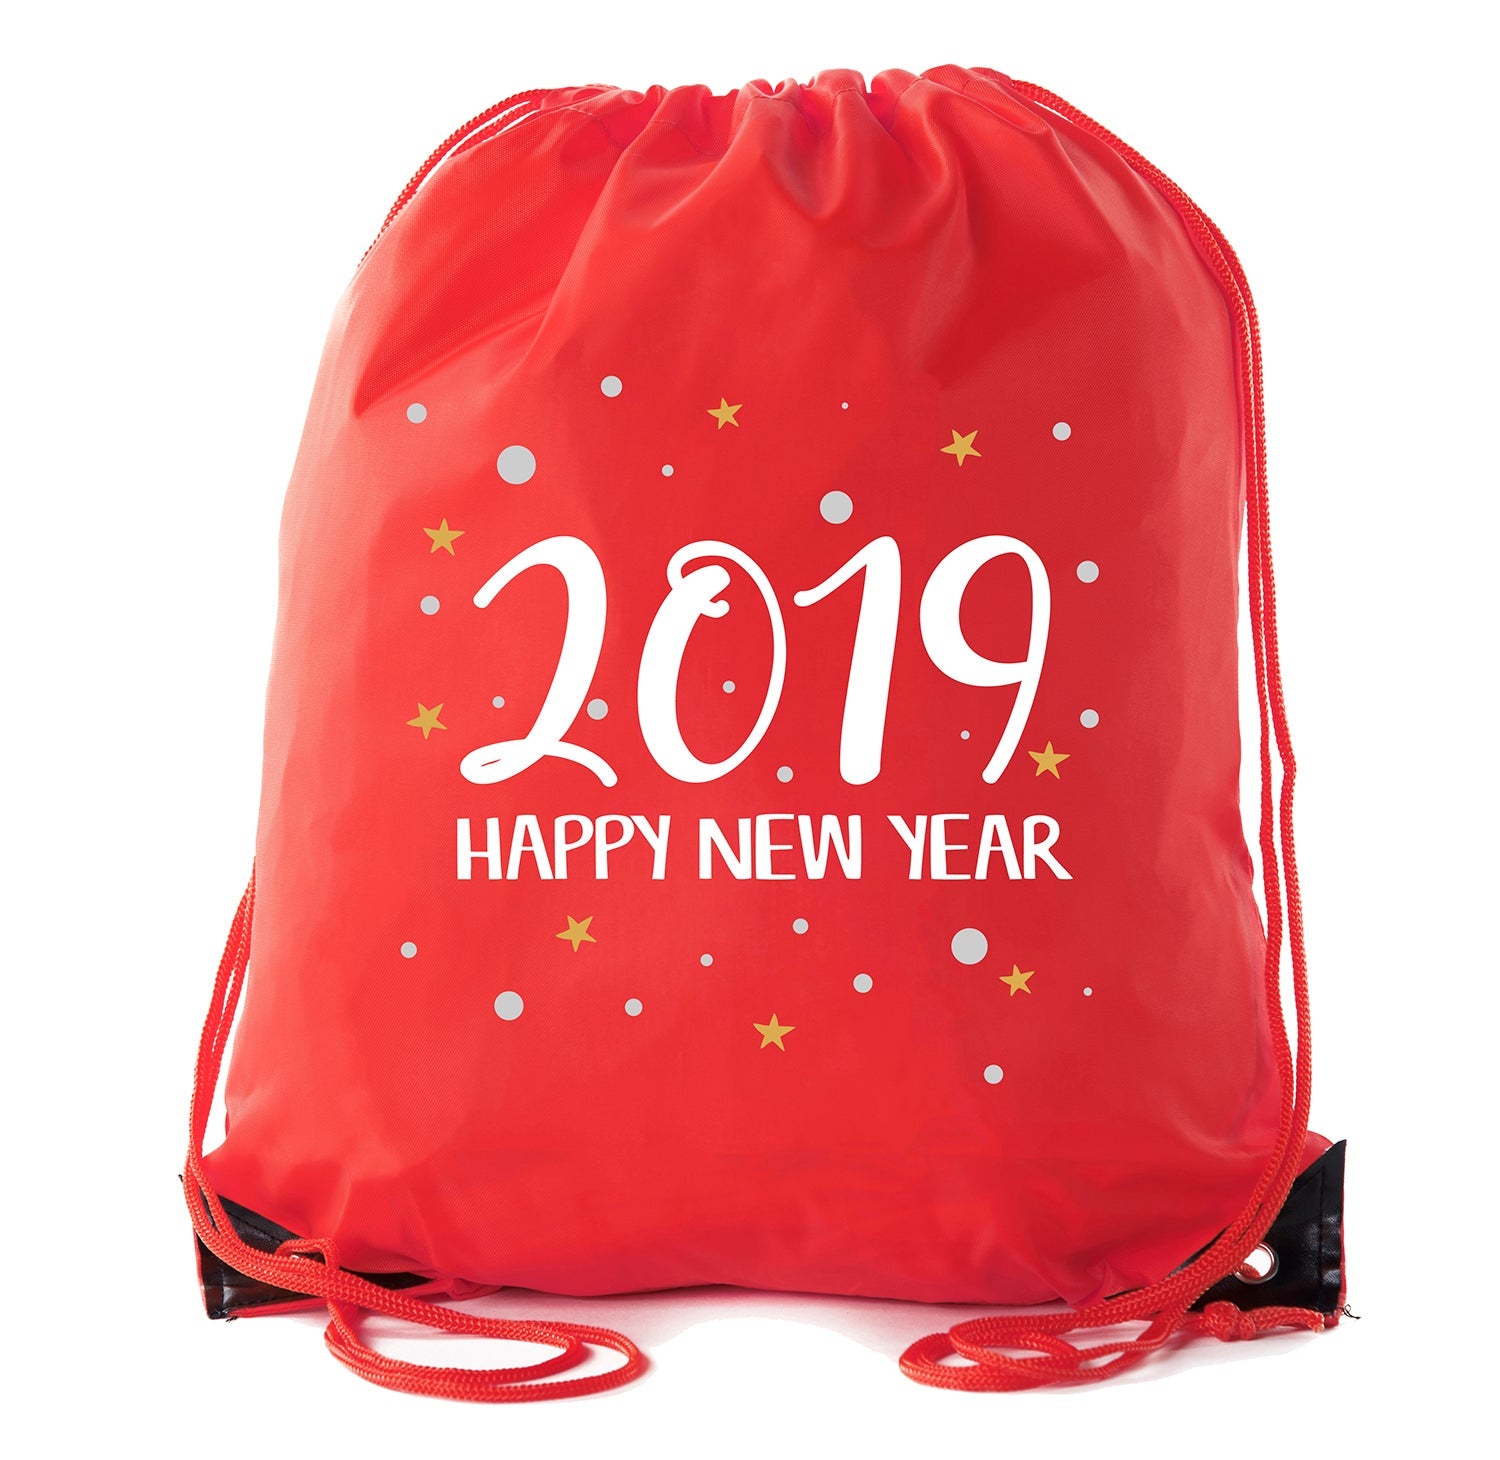 Accessory - New Year’s Eve Party Goody Bags, New Years Decorations, 2019 Gift Bags - 2019 Gold Stars